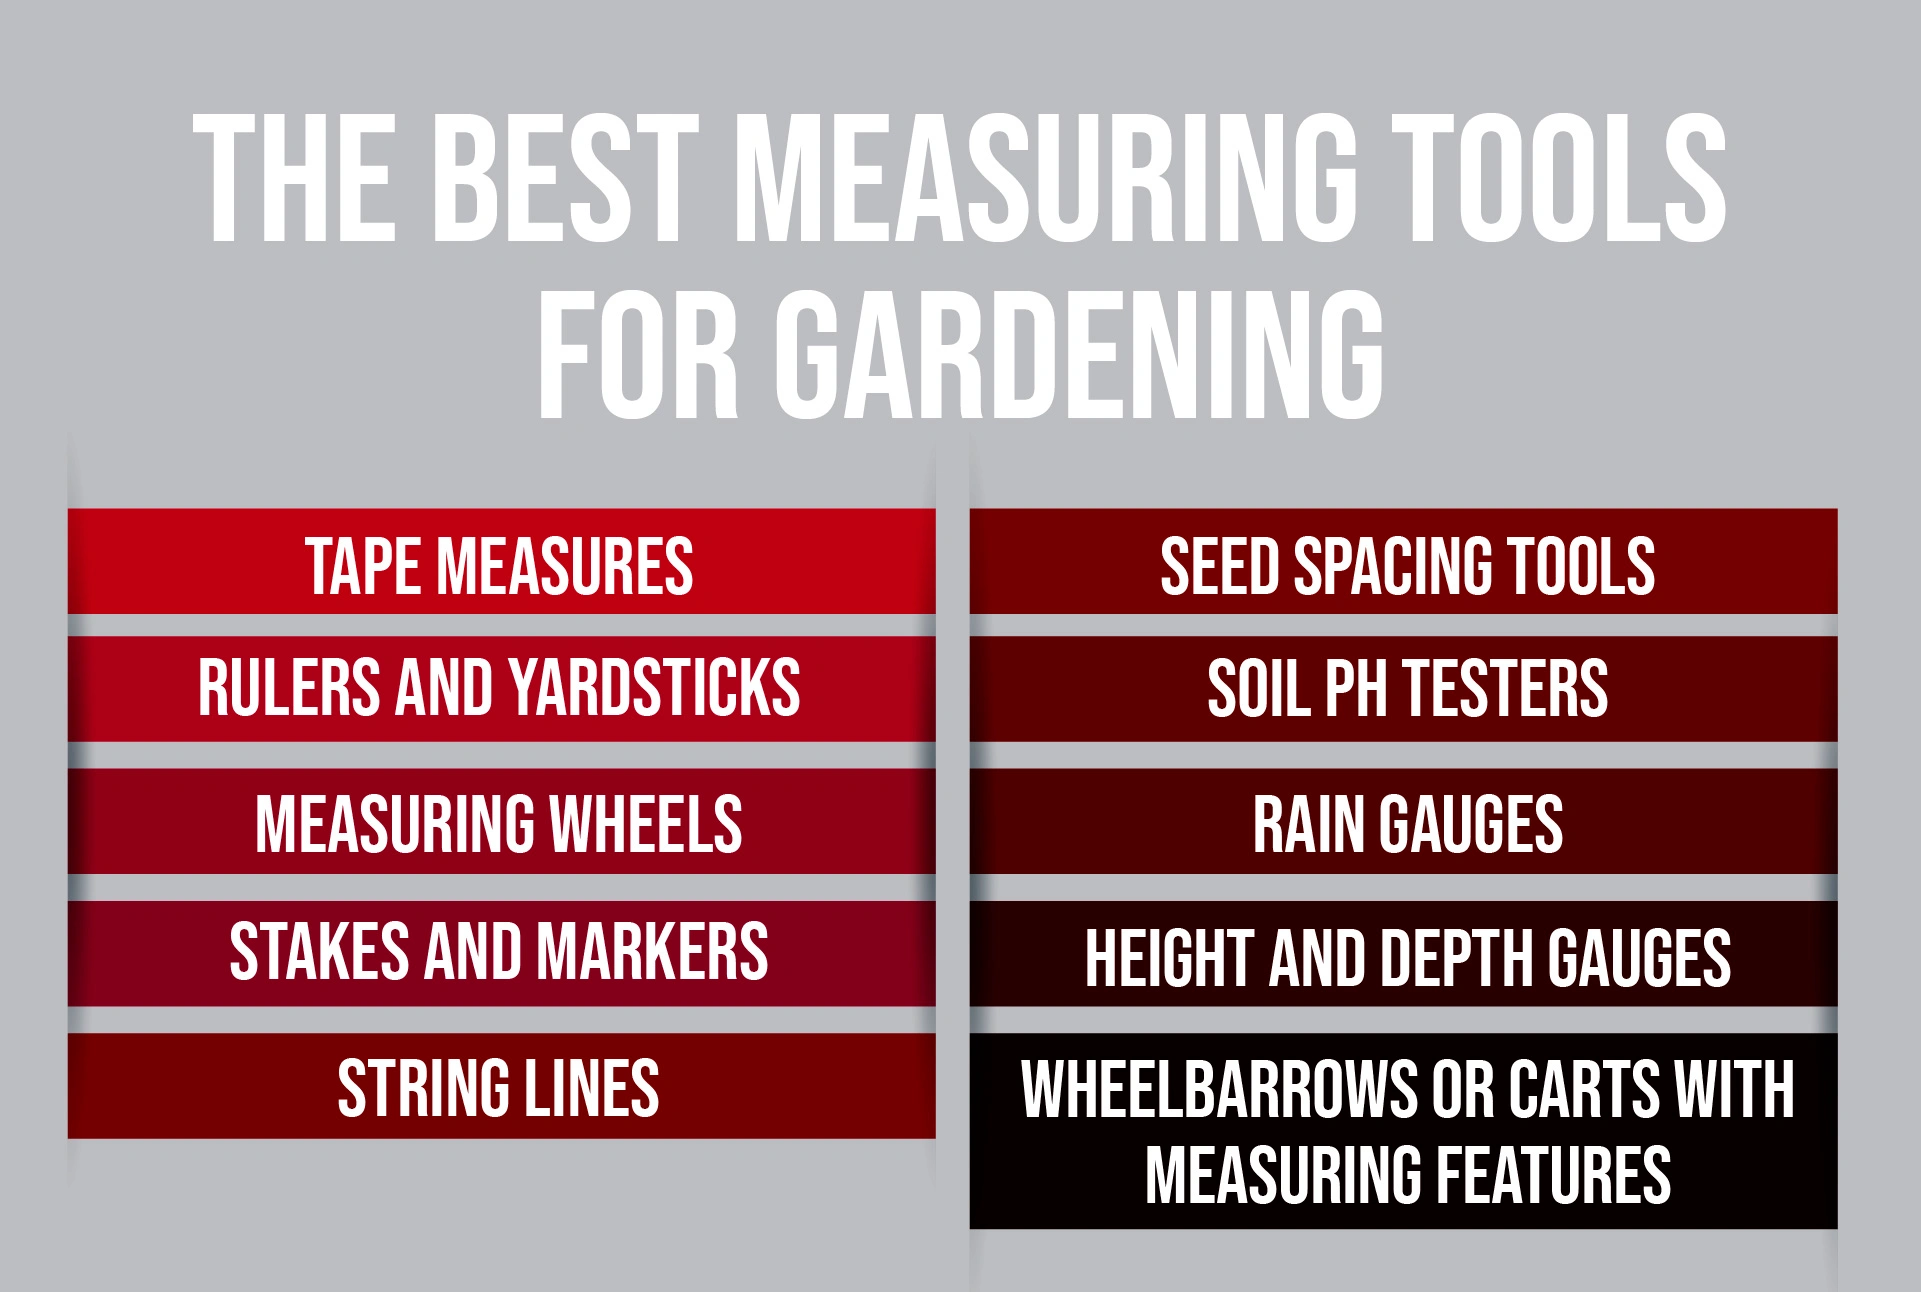 The Best Measuring Tools for Gardening
Surely, if you read the article up to here, you have a grasp on what are the best measuring tools for you. But if you’re just here to read about measuring tools for gardening, just dig in!
•	Tape measures
•	Rulers and yardsticks
•	Measuring wheels
•	Stakes and markers
•	String lines
•	Seed spacing tools
•	Soil pH testers
•	Rain gauges
•	Height and depth gauges
•	Wheelbarrows or carts with measuring features
